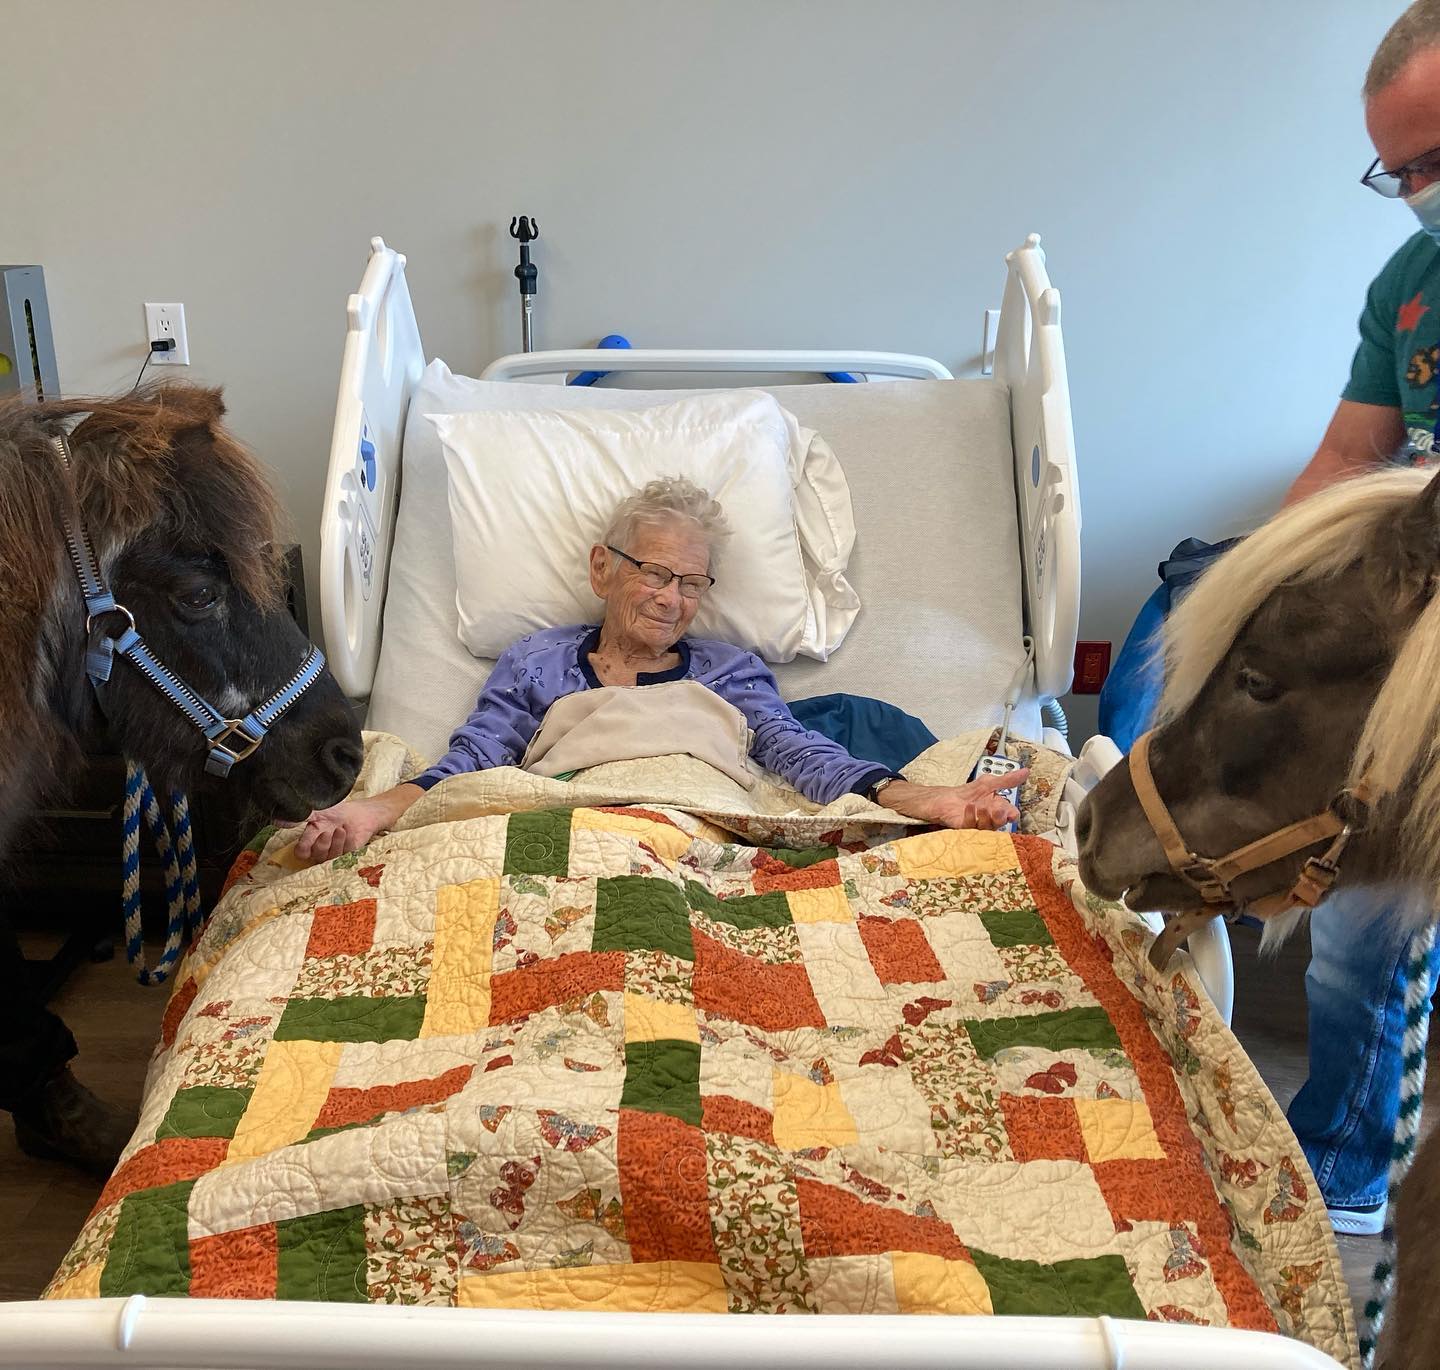 A woman laying in a hospital bed with a pony on either side of her